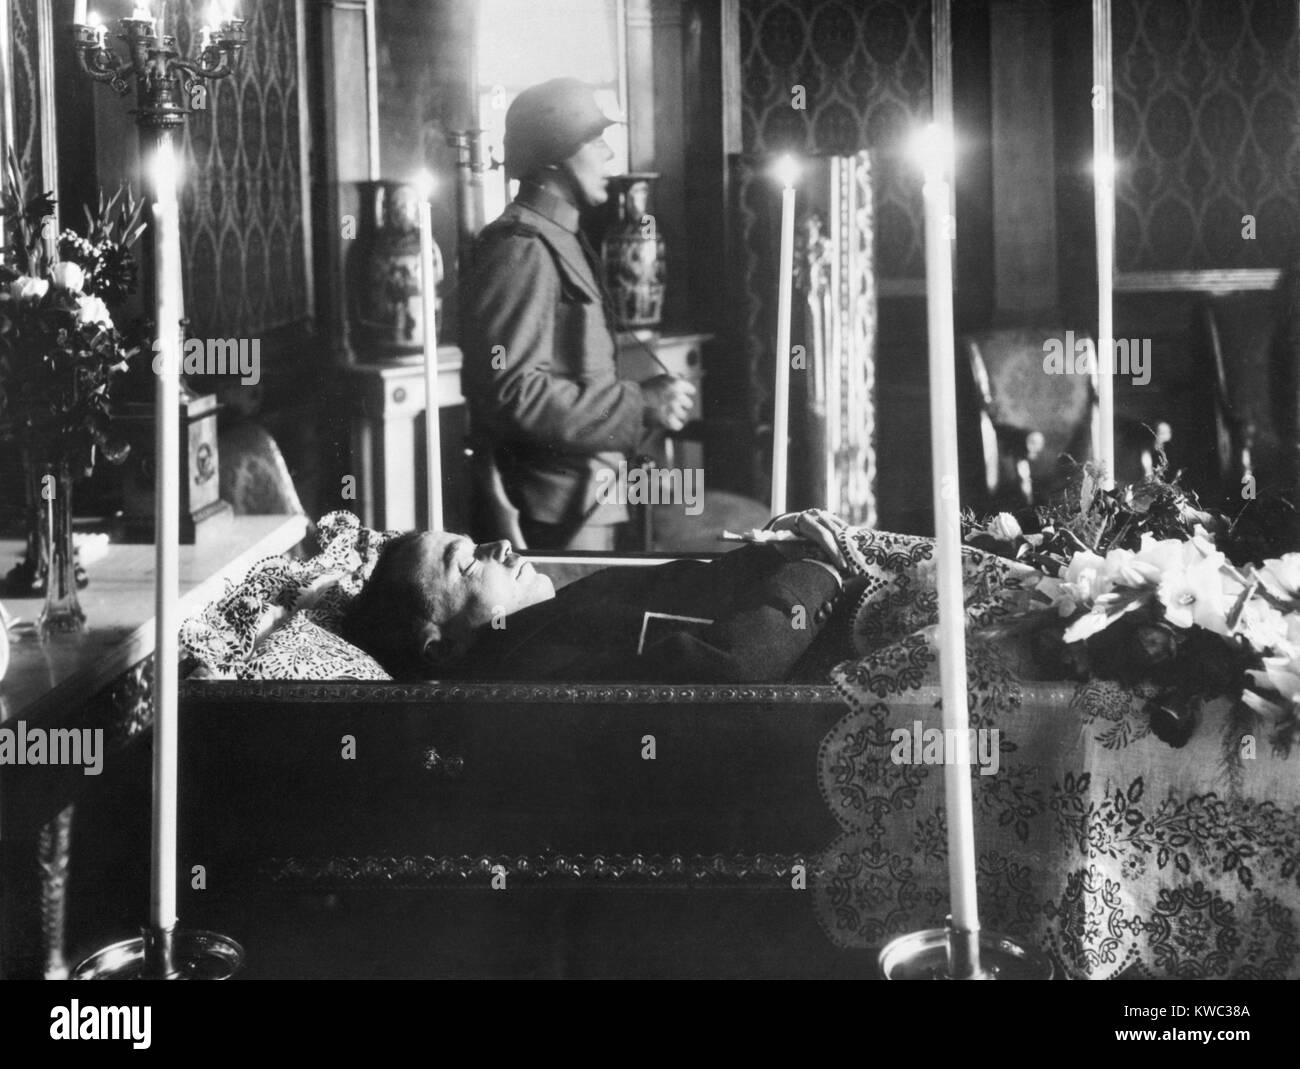 Austrian Chancellor, Engelbert Dollfuss, lies in state after his assassination on July 7, 1934. He was killed by Austrian Nazi's because of his opposition to union with Hitler's Nazi Germany. He favored the independent, anti-socialist government of his 'Austrofascism' modeled after Italian fascism. (BSLOC 2015 13 25) Stock Photo